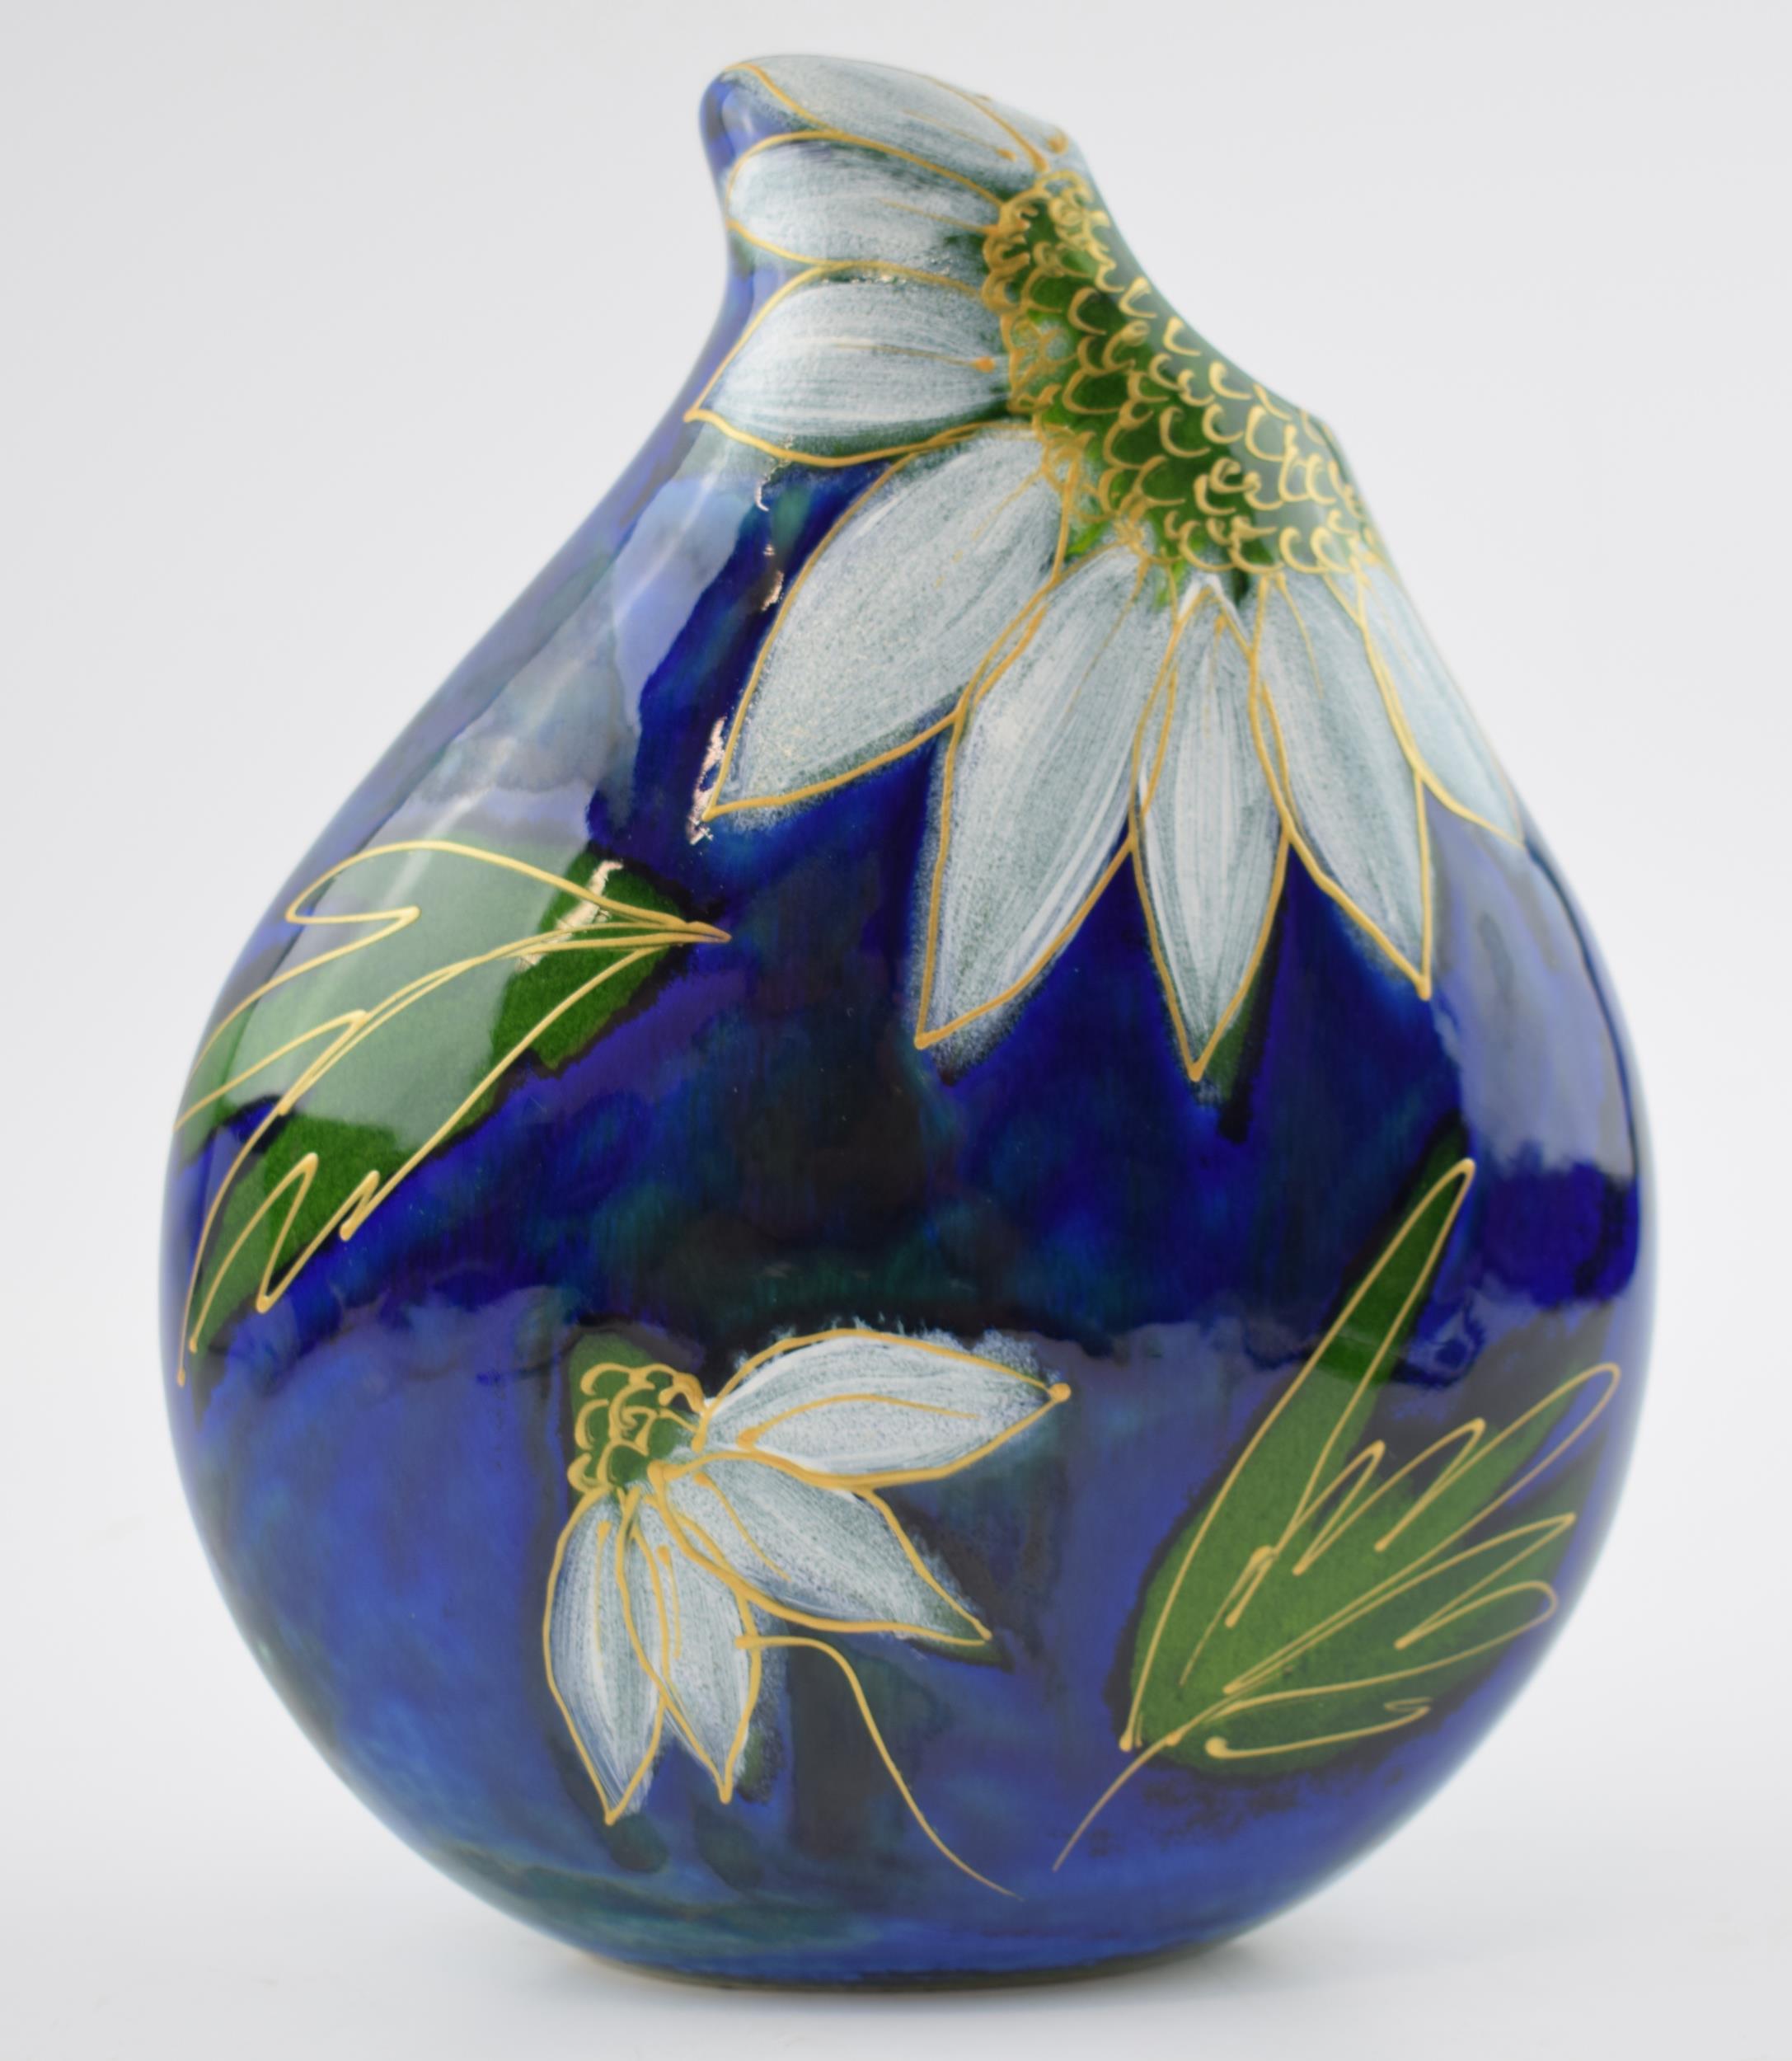 Early Anita Harris Art Pottery teardrop vase, decorated with a blue and green floral scene, 22cm